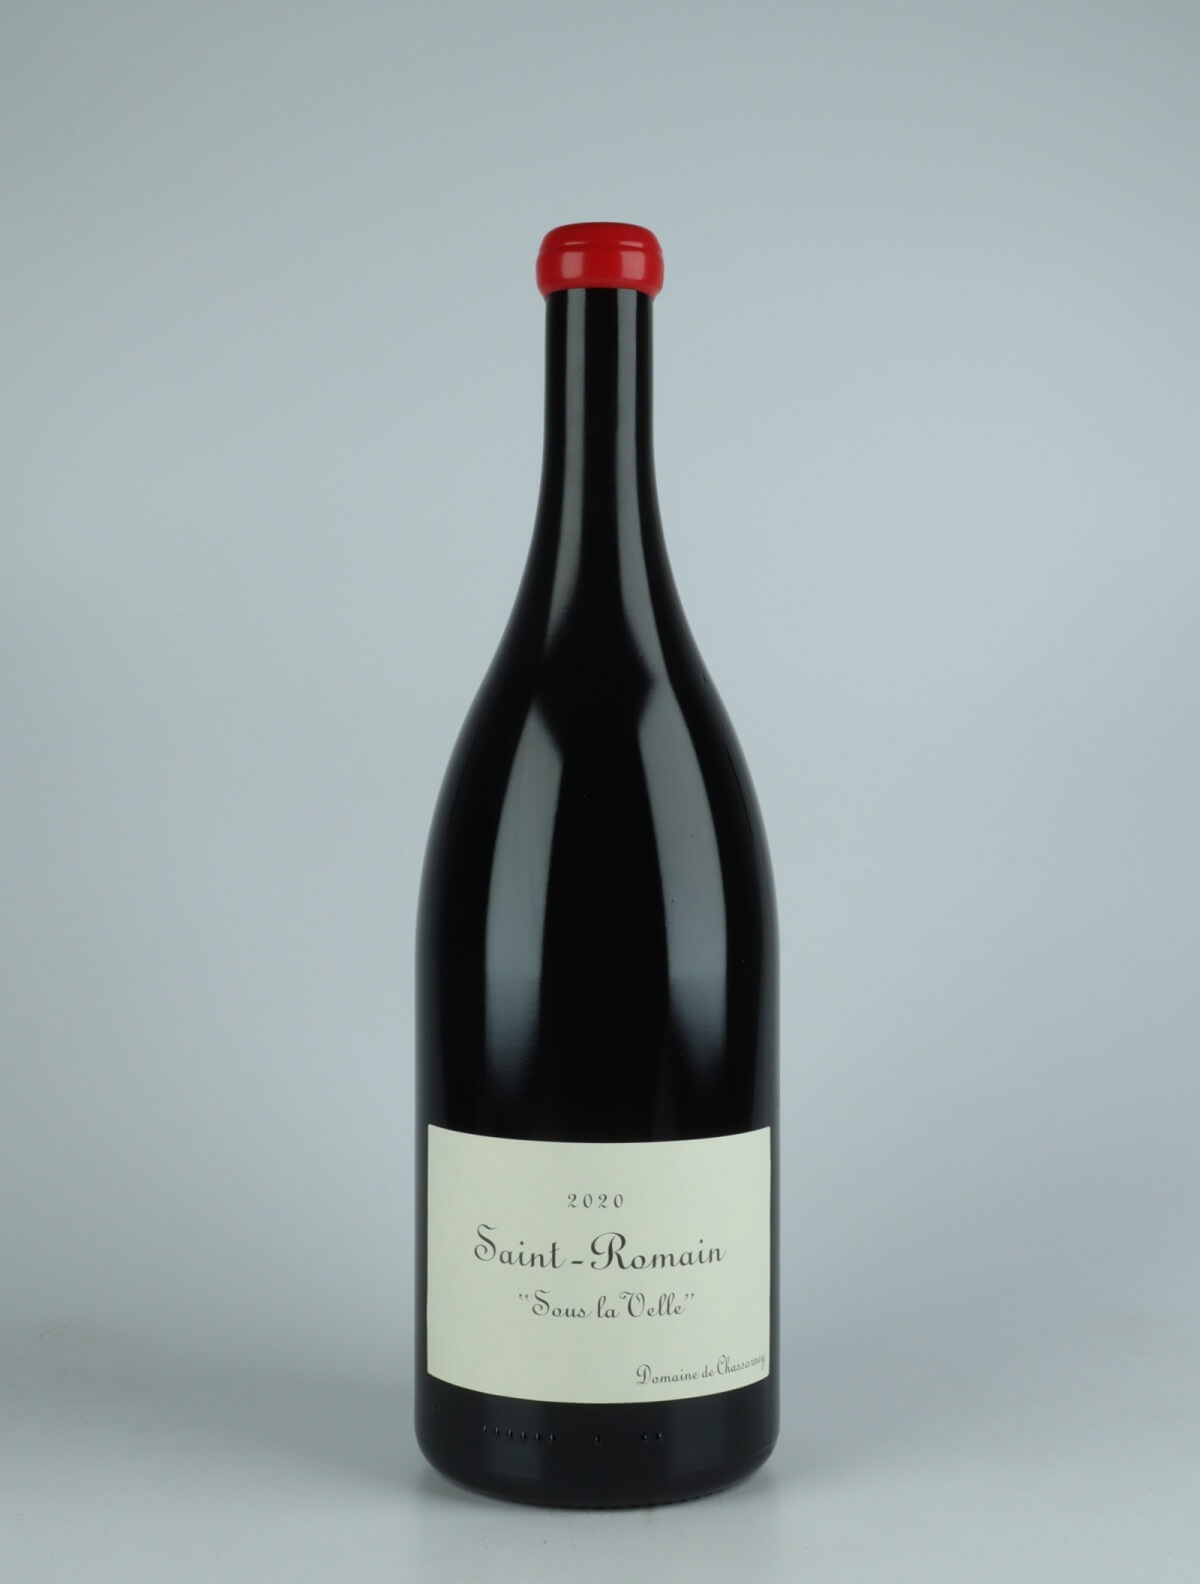 A bottle 2020 Saint Romain Rouge - Sous la Velle Red wine from Domaine de Chassorney, Burgundy in France